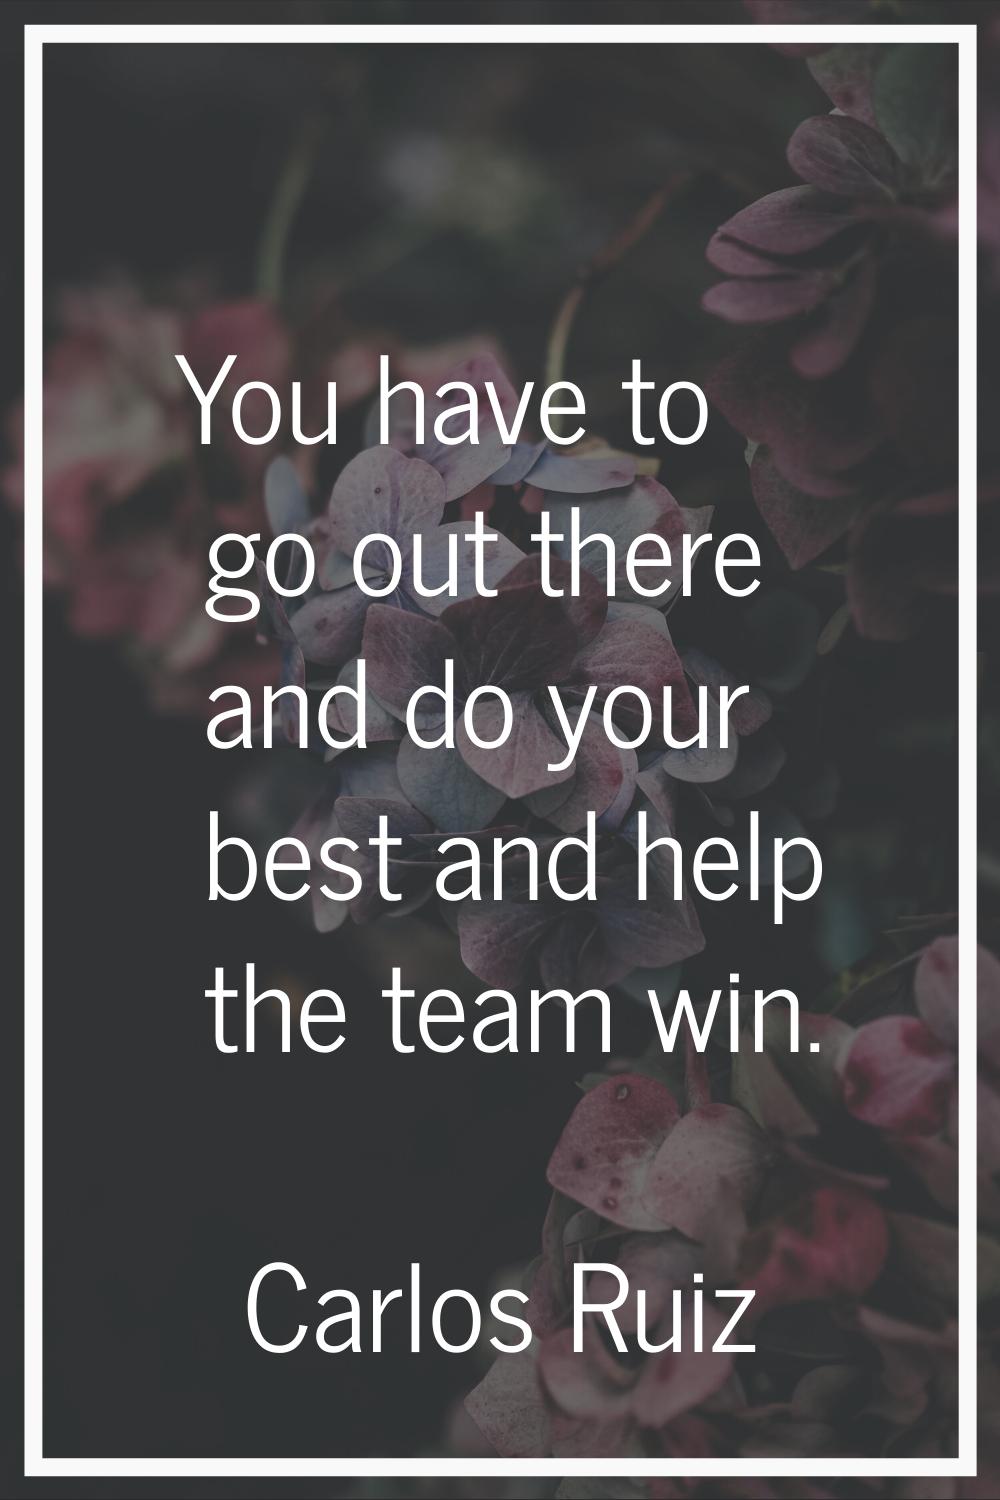 You have to go out there and do your best and help the team win.